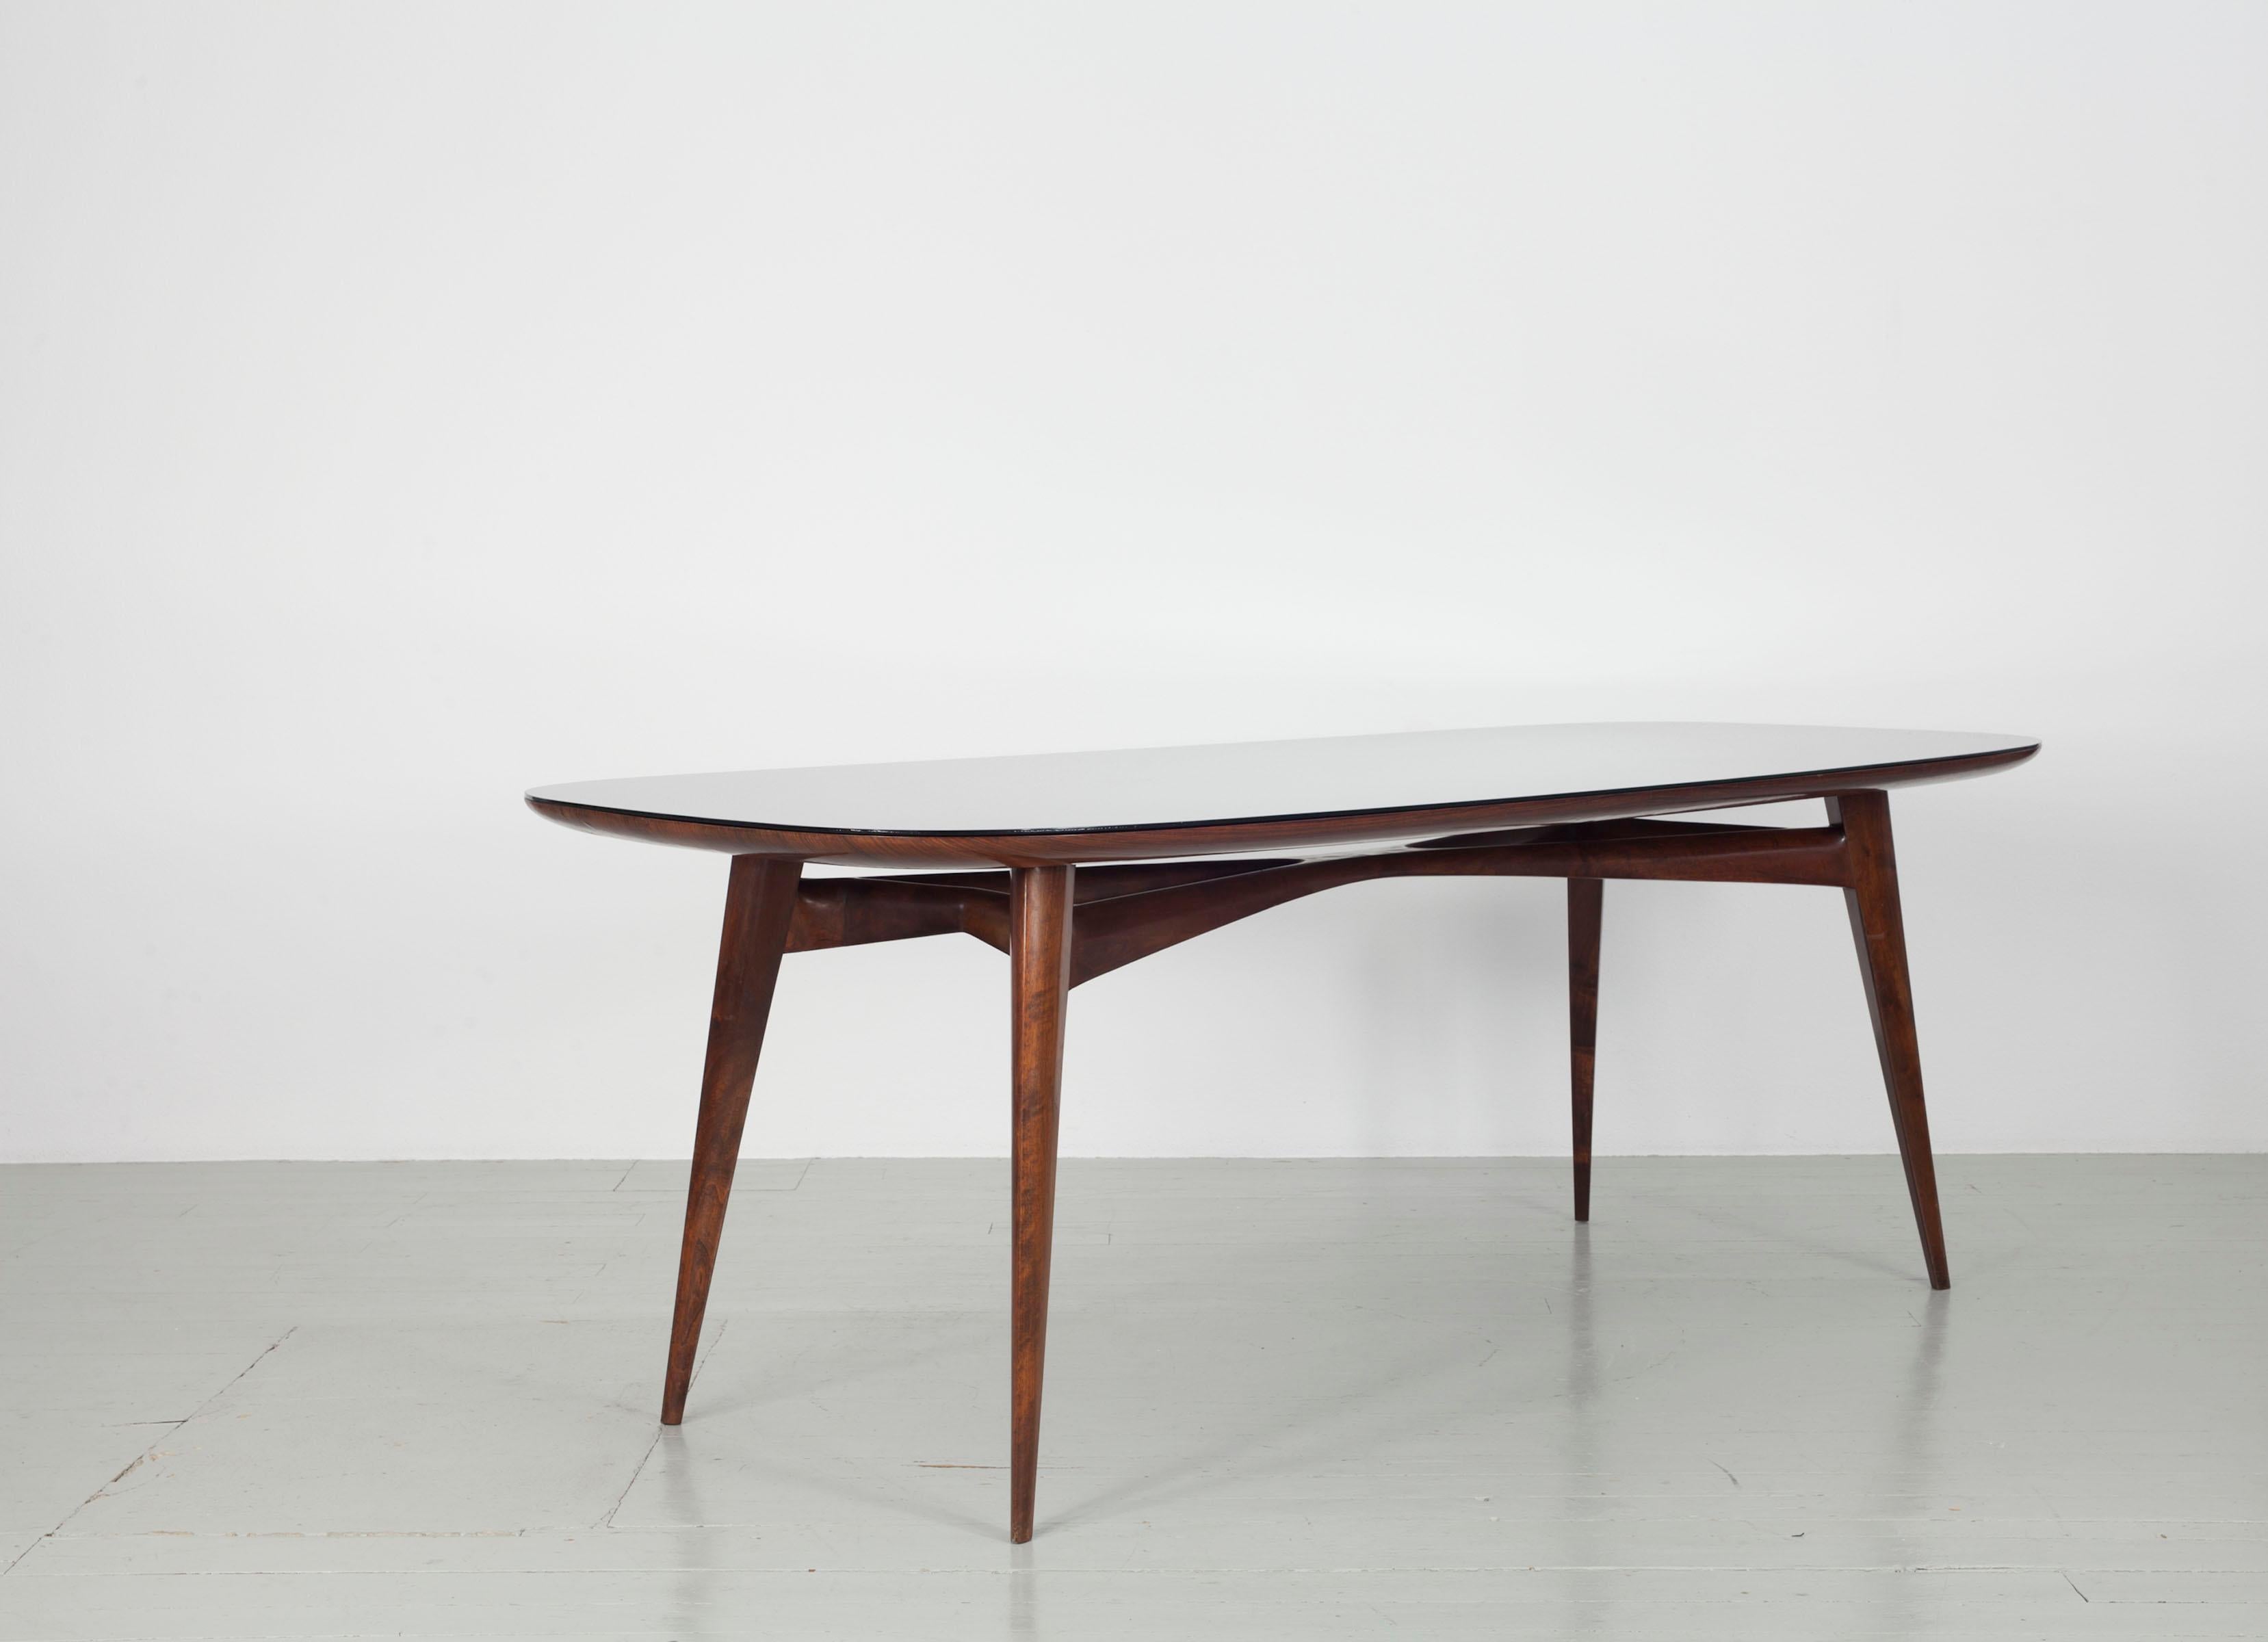 This elegant dining table was designed by Vittorio Dassi in Italy in the 1950s. Both the table legs and the tabletop are made of lacquered rosewood. There is a black coloured glass overlay on the table top. The thin table legs and the extraordinary